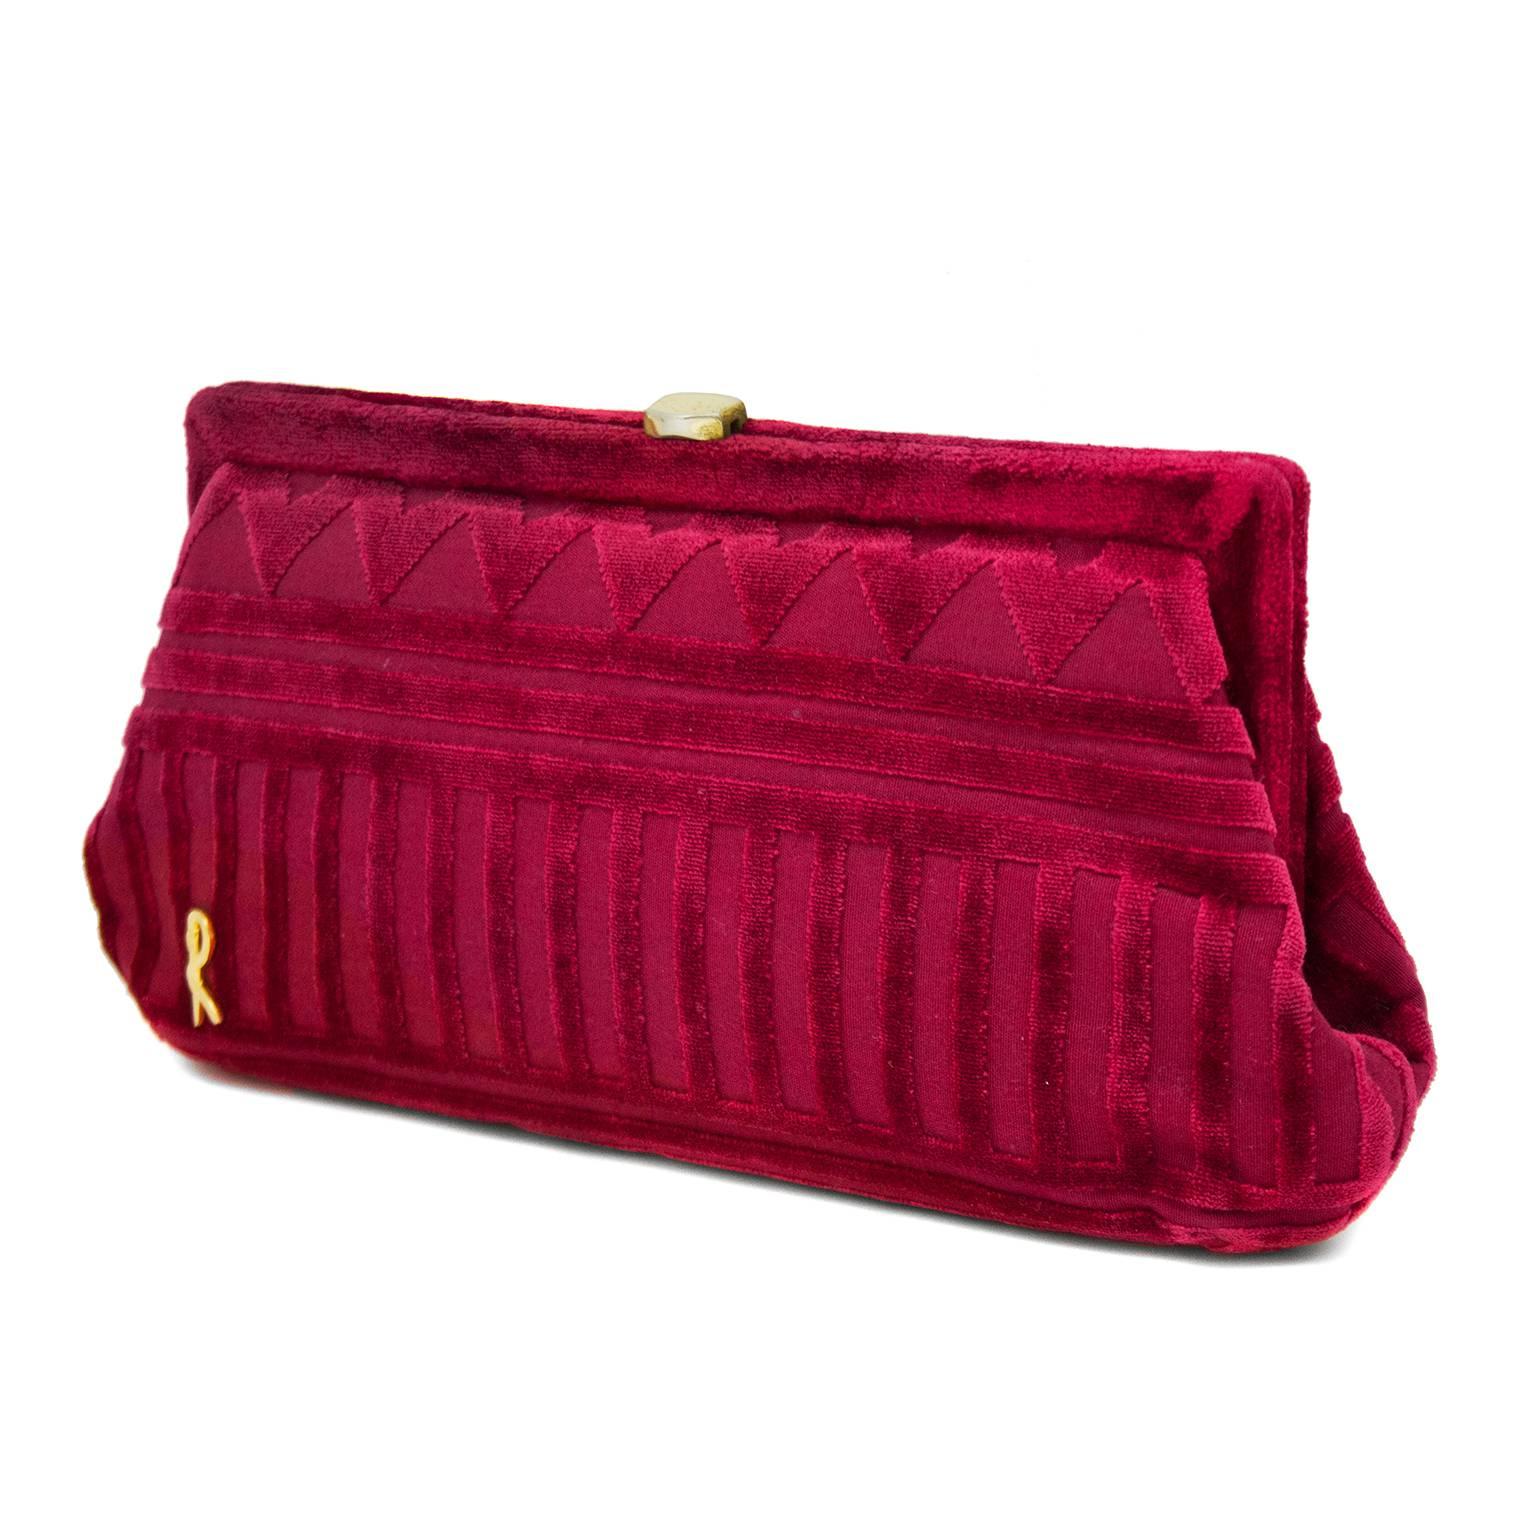 1970s Roberta Di Camerino double top handle bag. Beautiful deep raspberry colour with cut velvet patterns throughout and gold hardware. Long 14" removable velvet strap and a short gold tone metal handle. Gold handle flips down and can be hidden